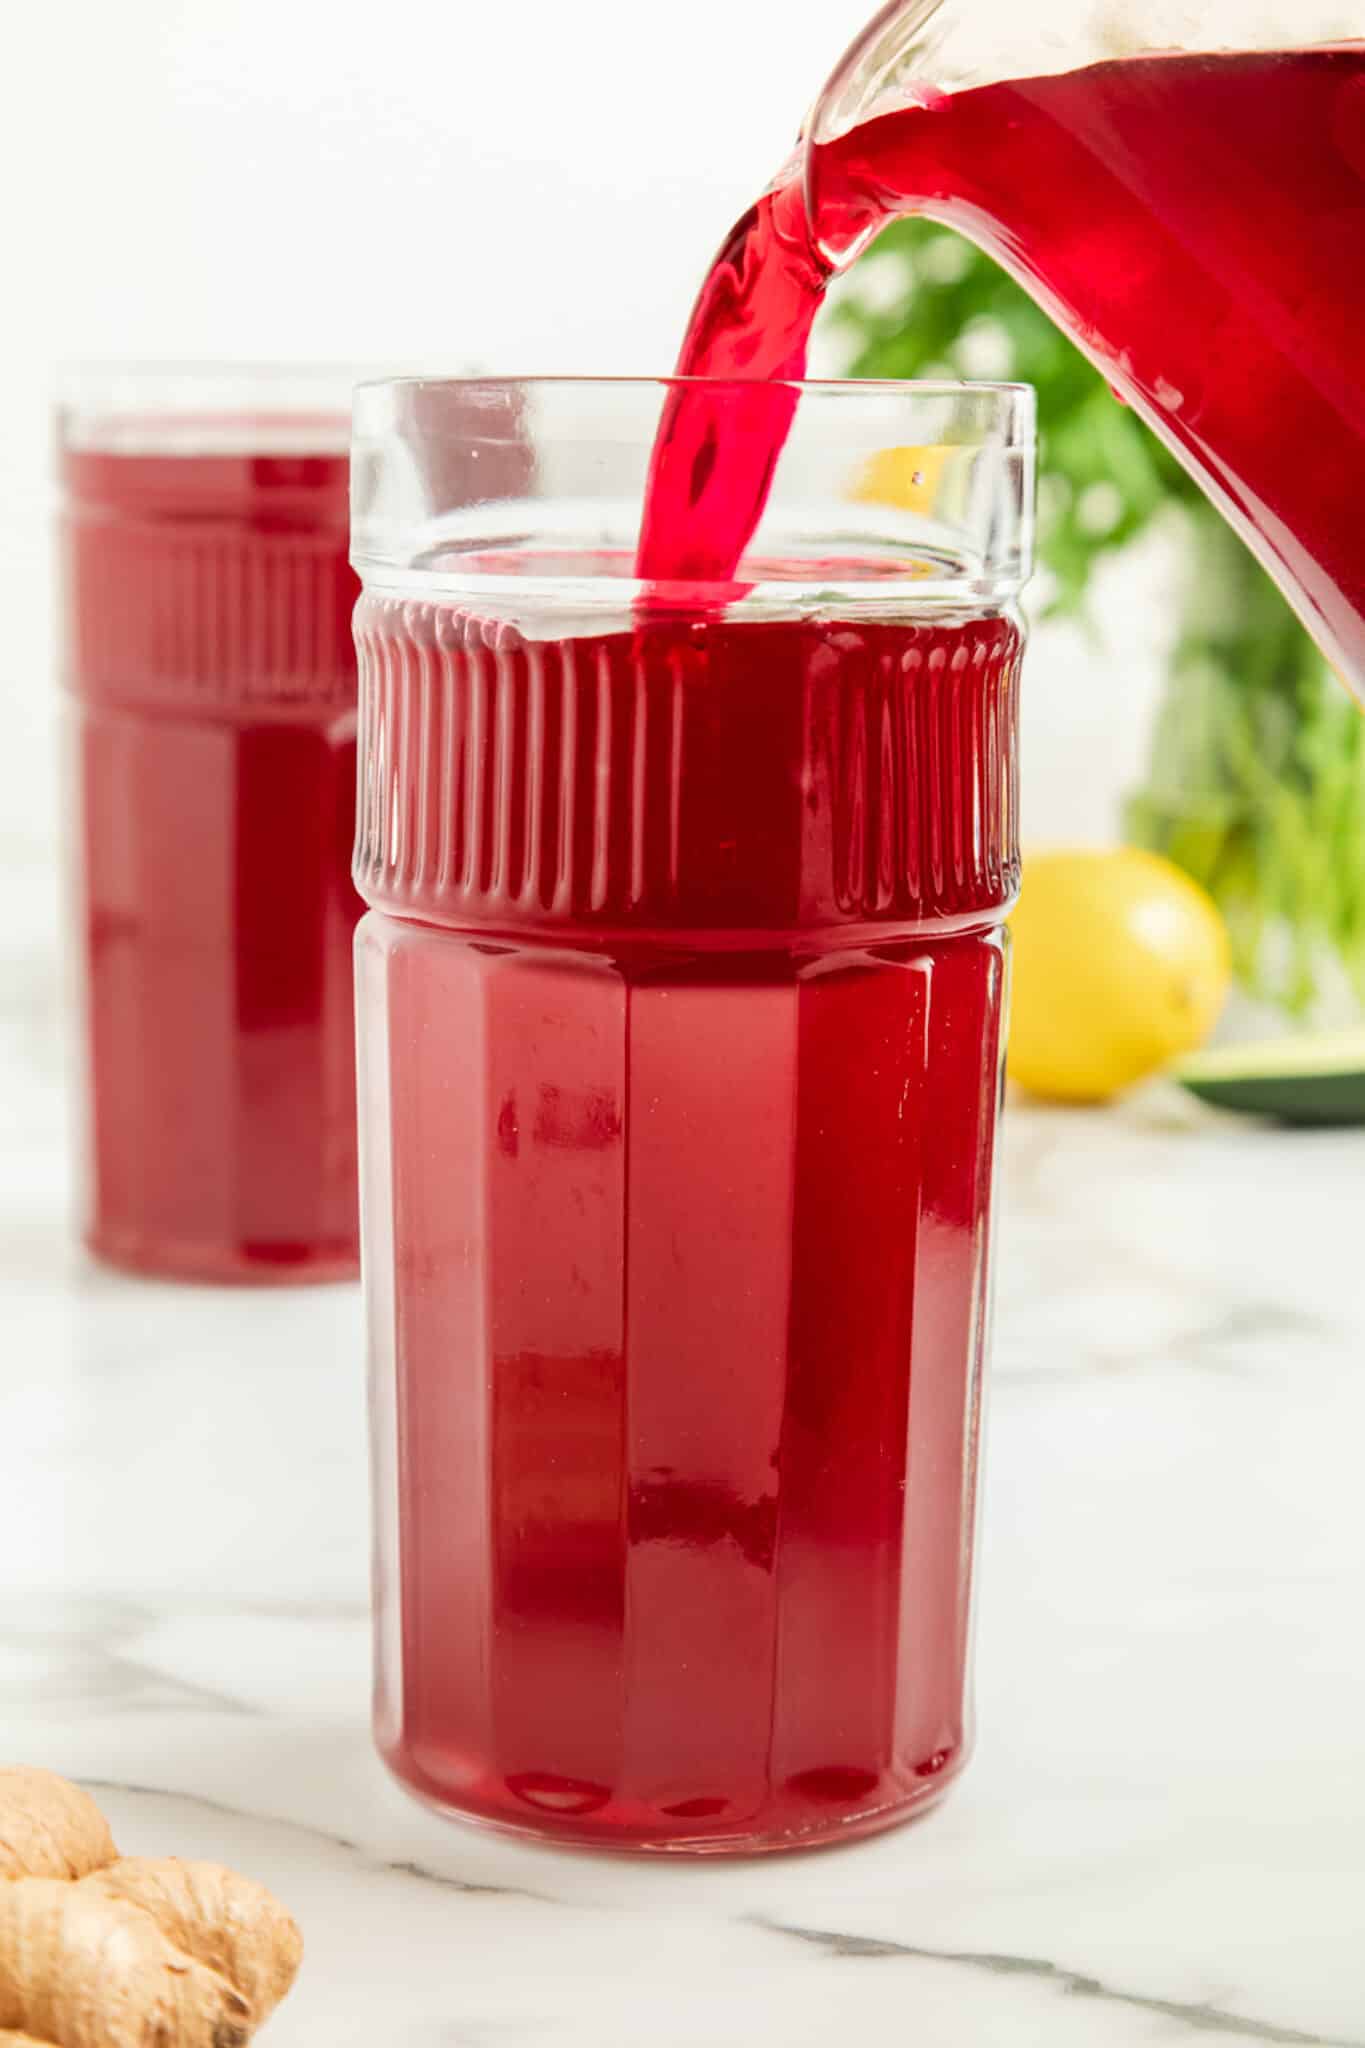 how can i make beetroot juice